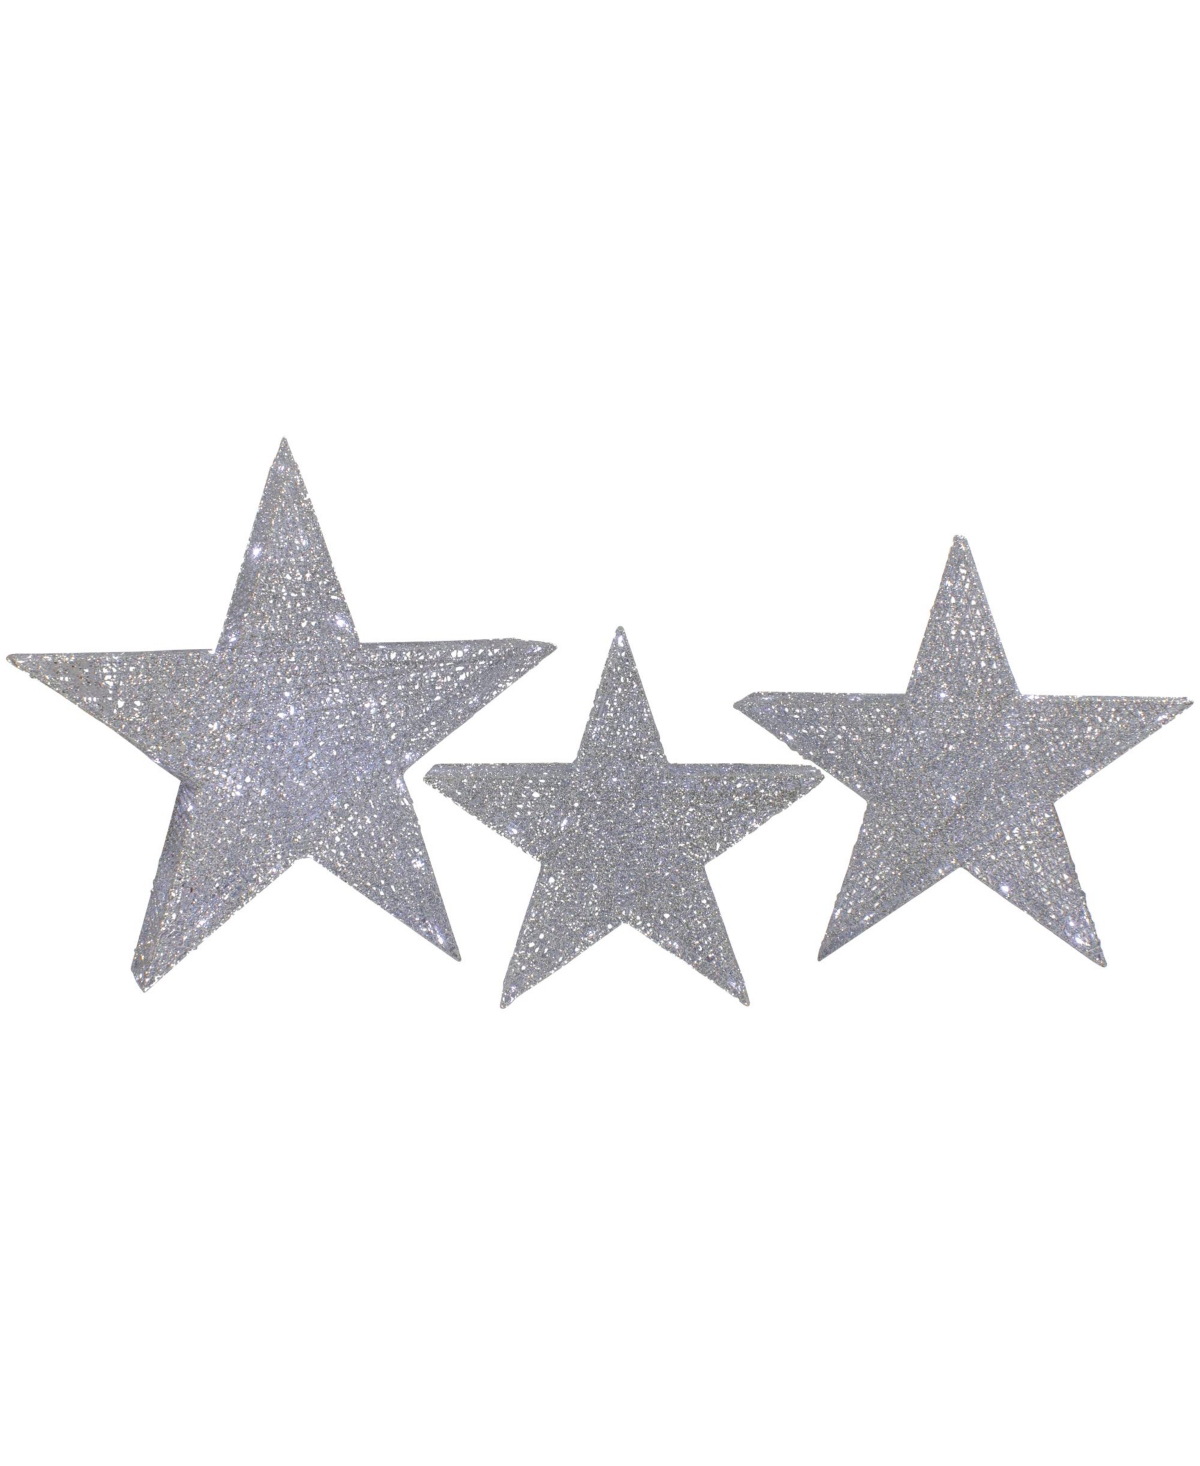 Northlight 24" Led Lighted Stars Outdoor Christmas Decorations, Set Of 3 In Silver-tone